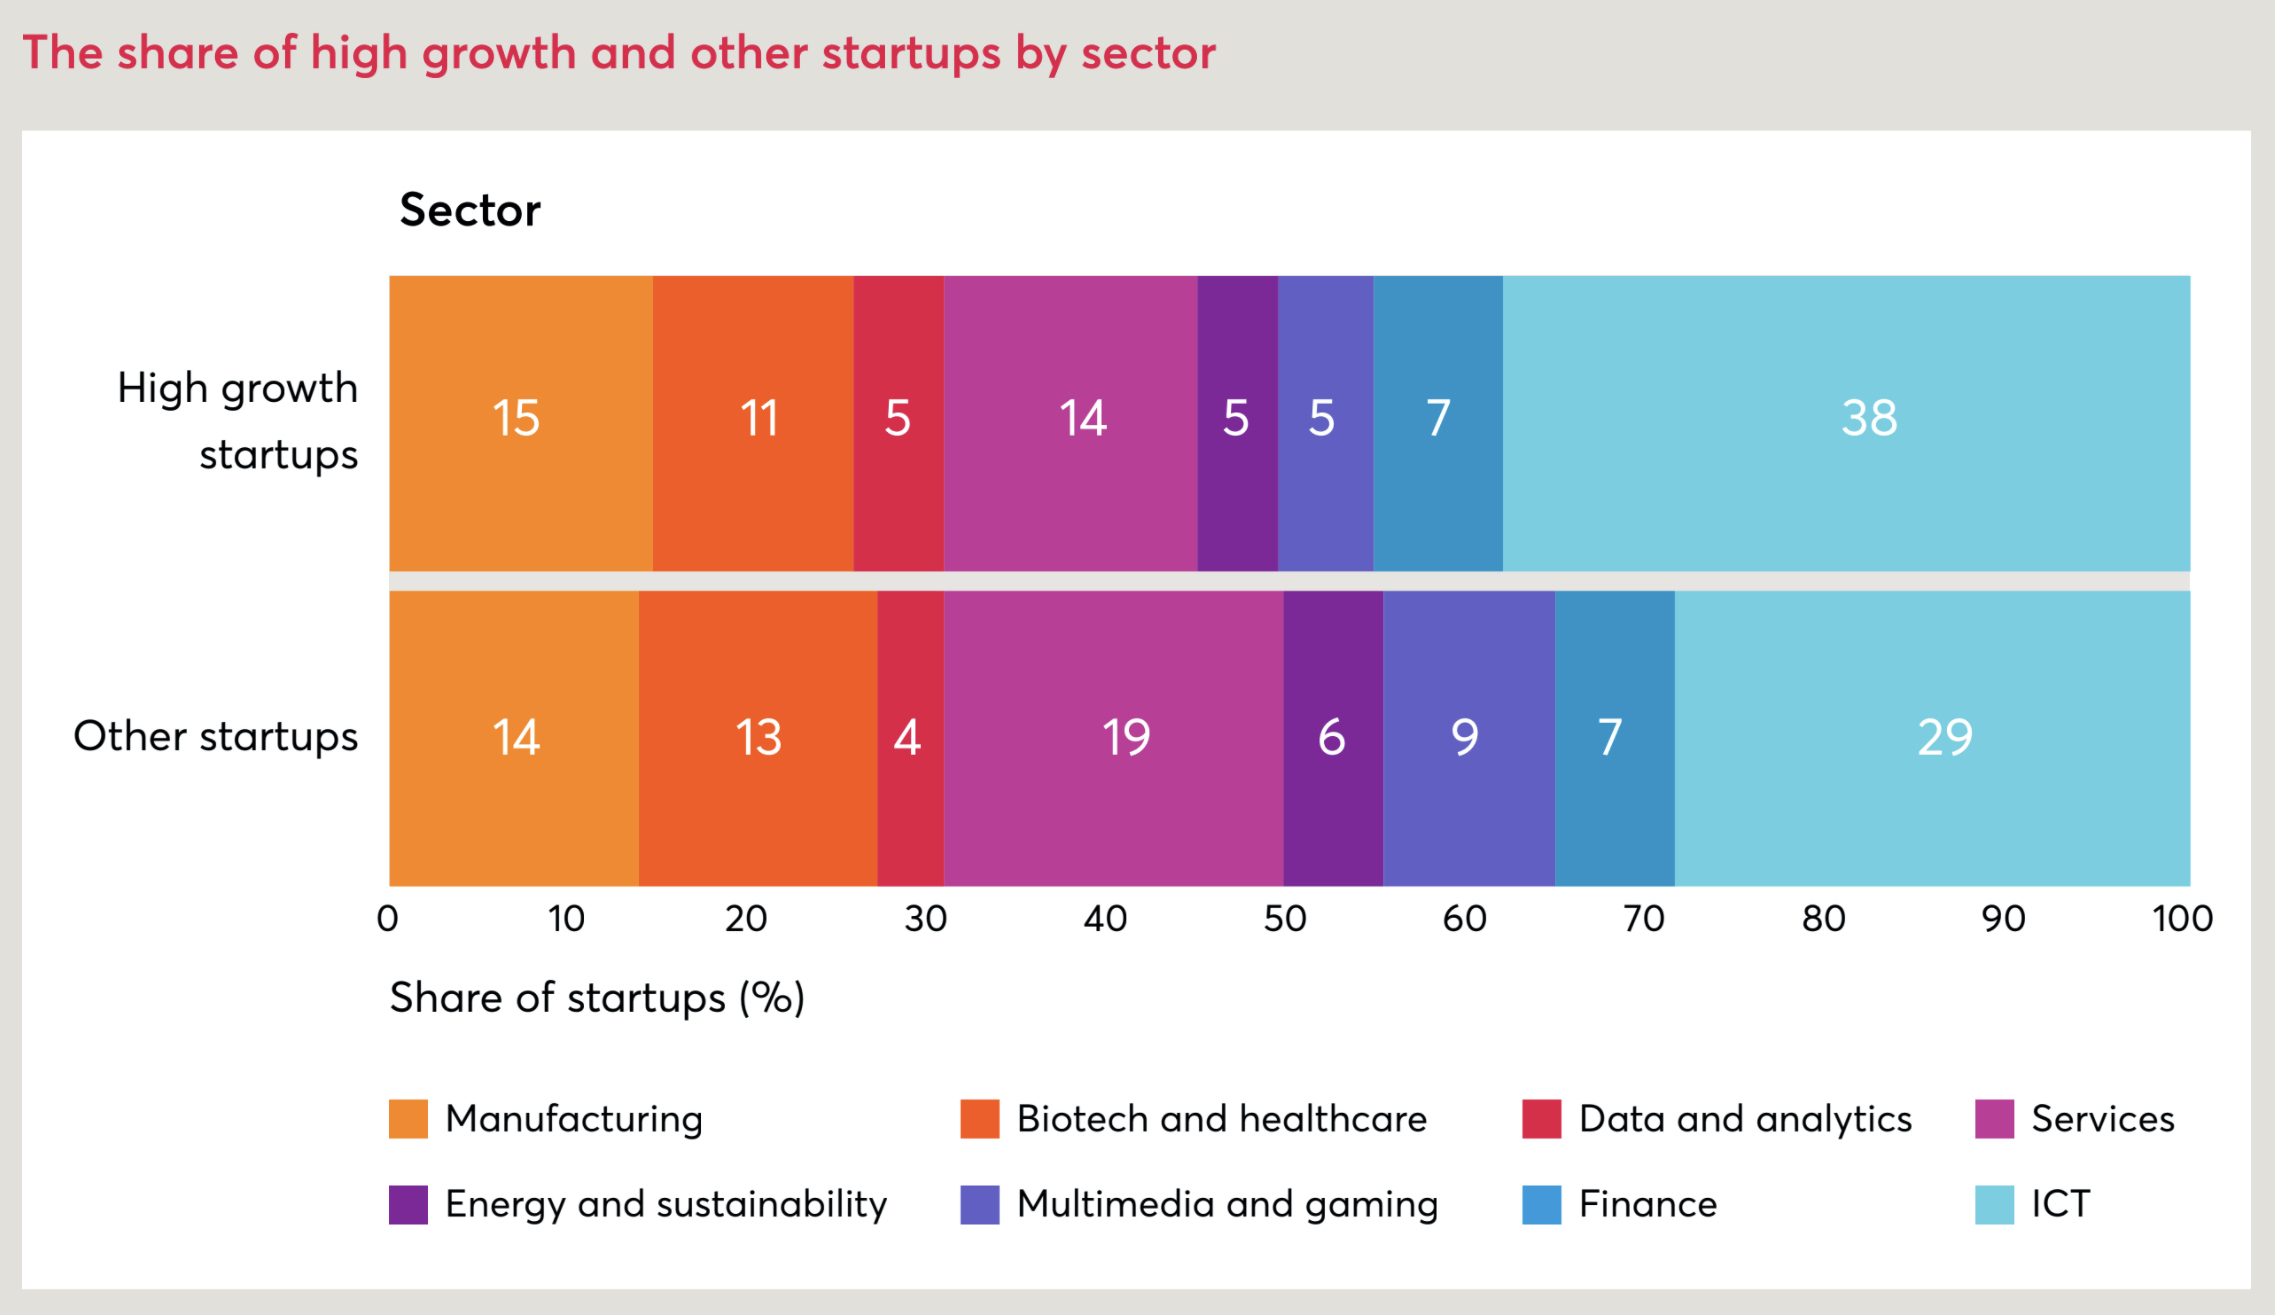 EIB: The share of high growth and other startups by sector